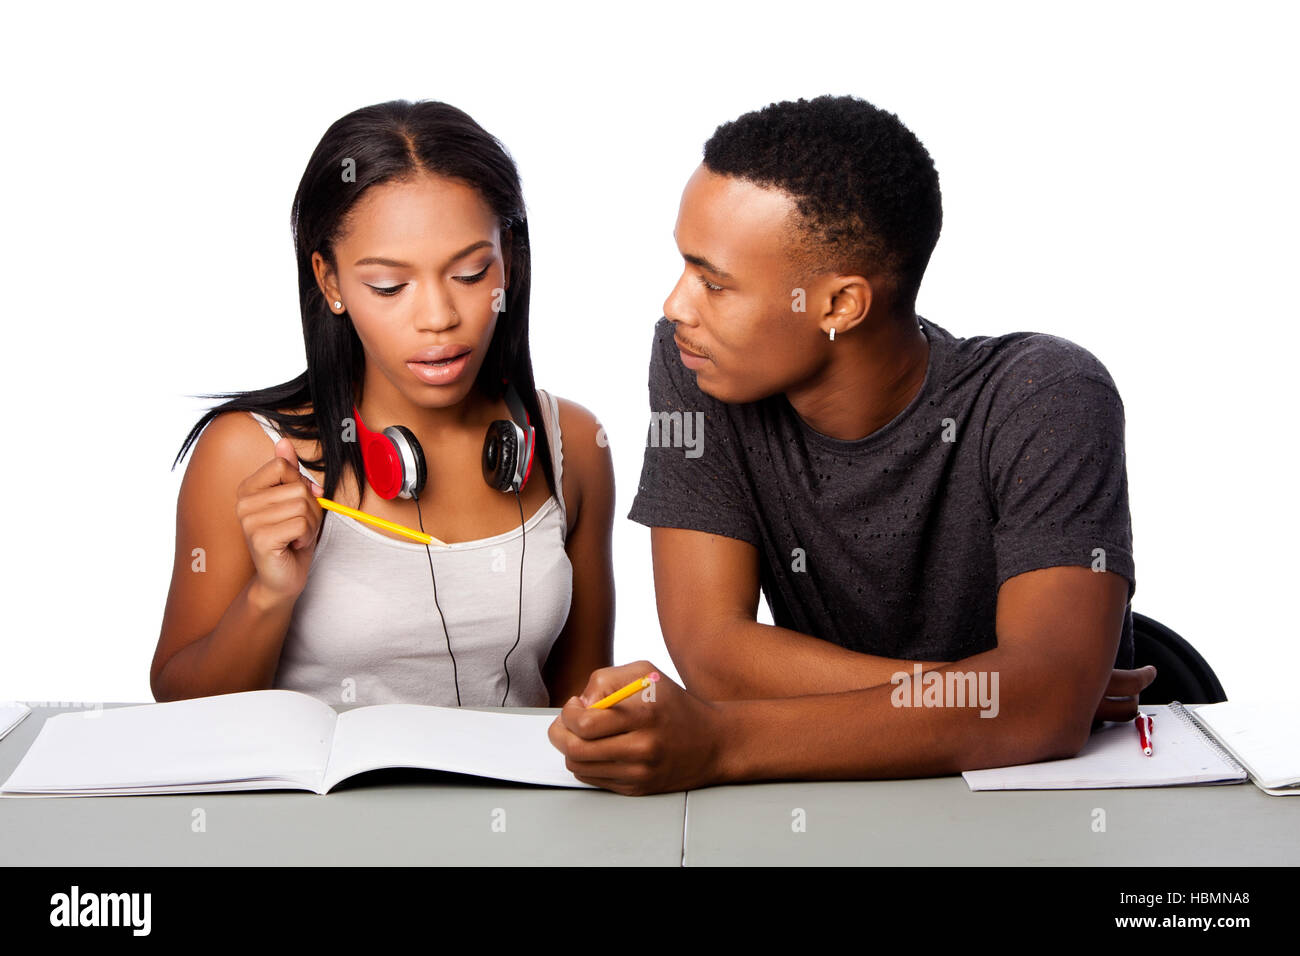 Students helping studying together Stock Photo